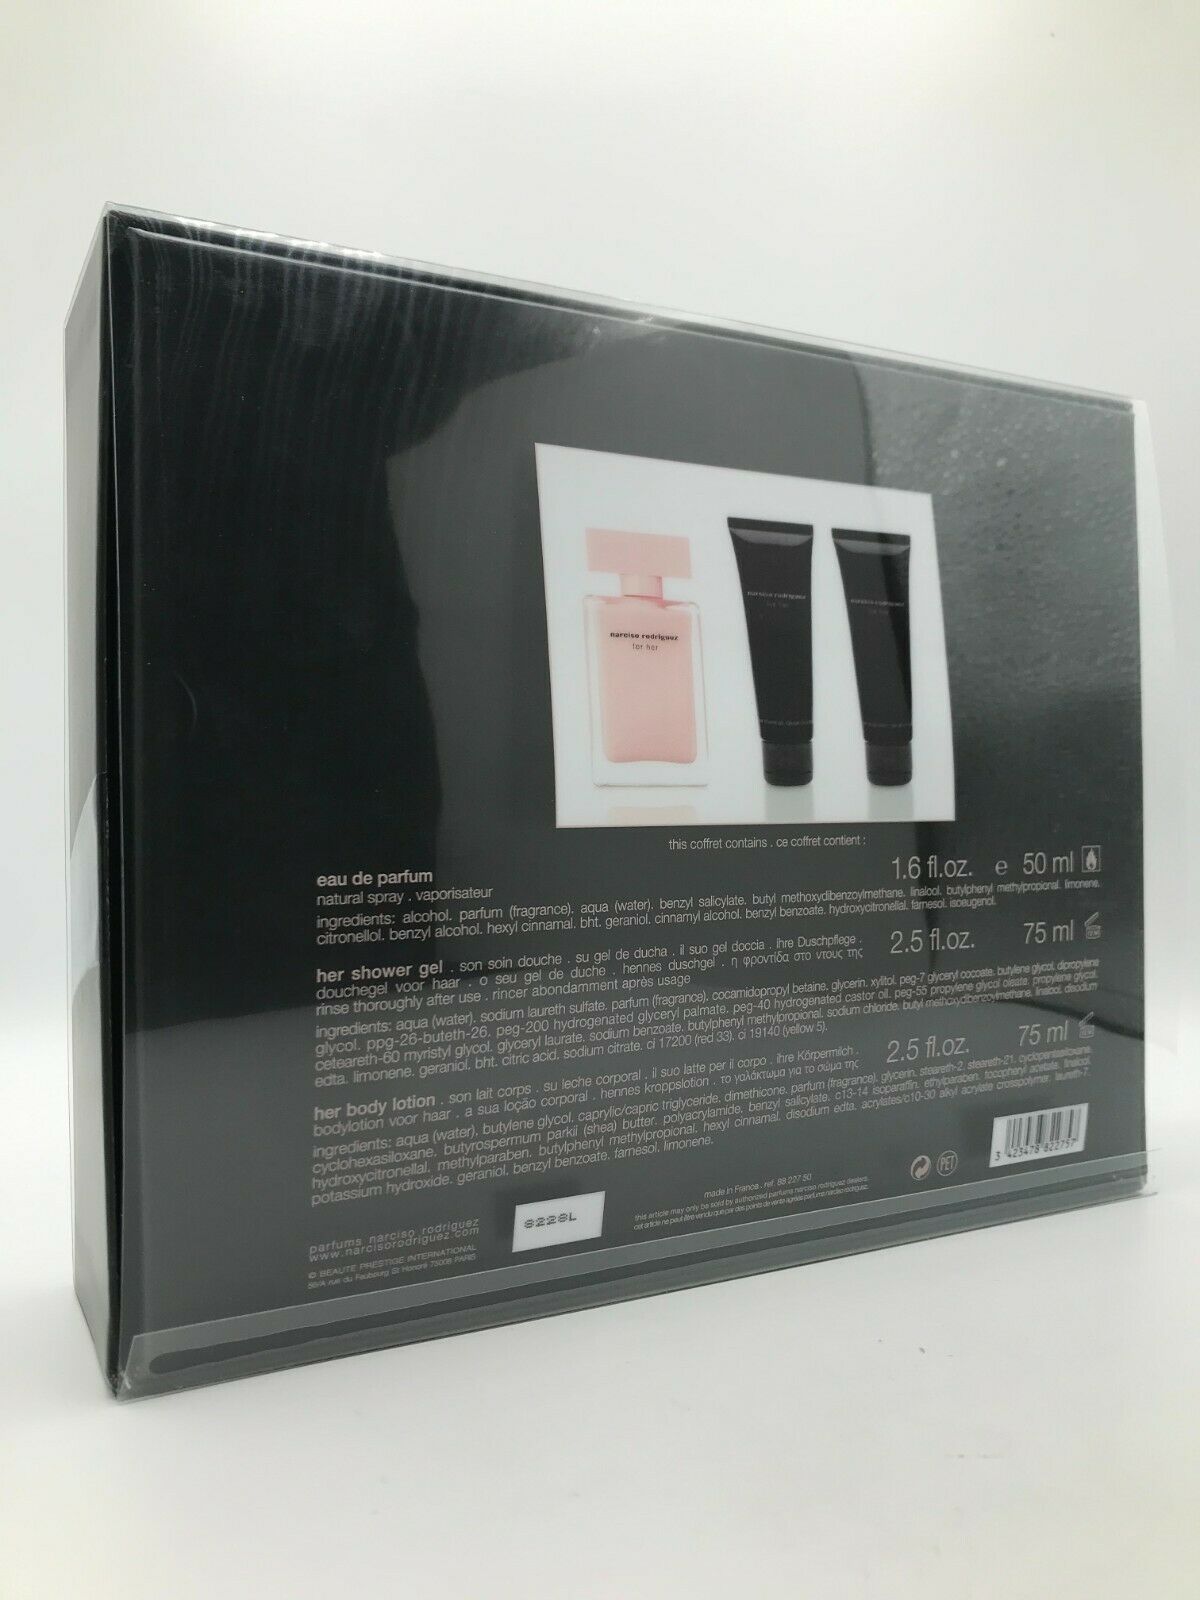 Narciso Rodriguez for her EDP gift set